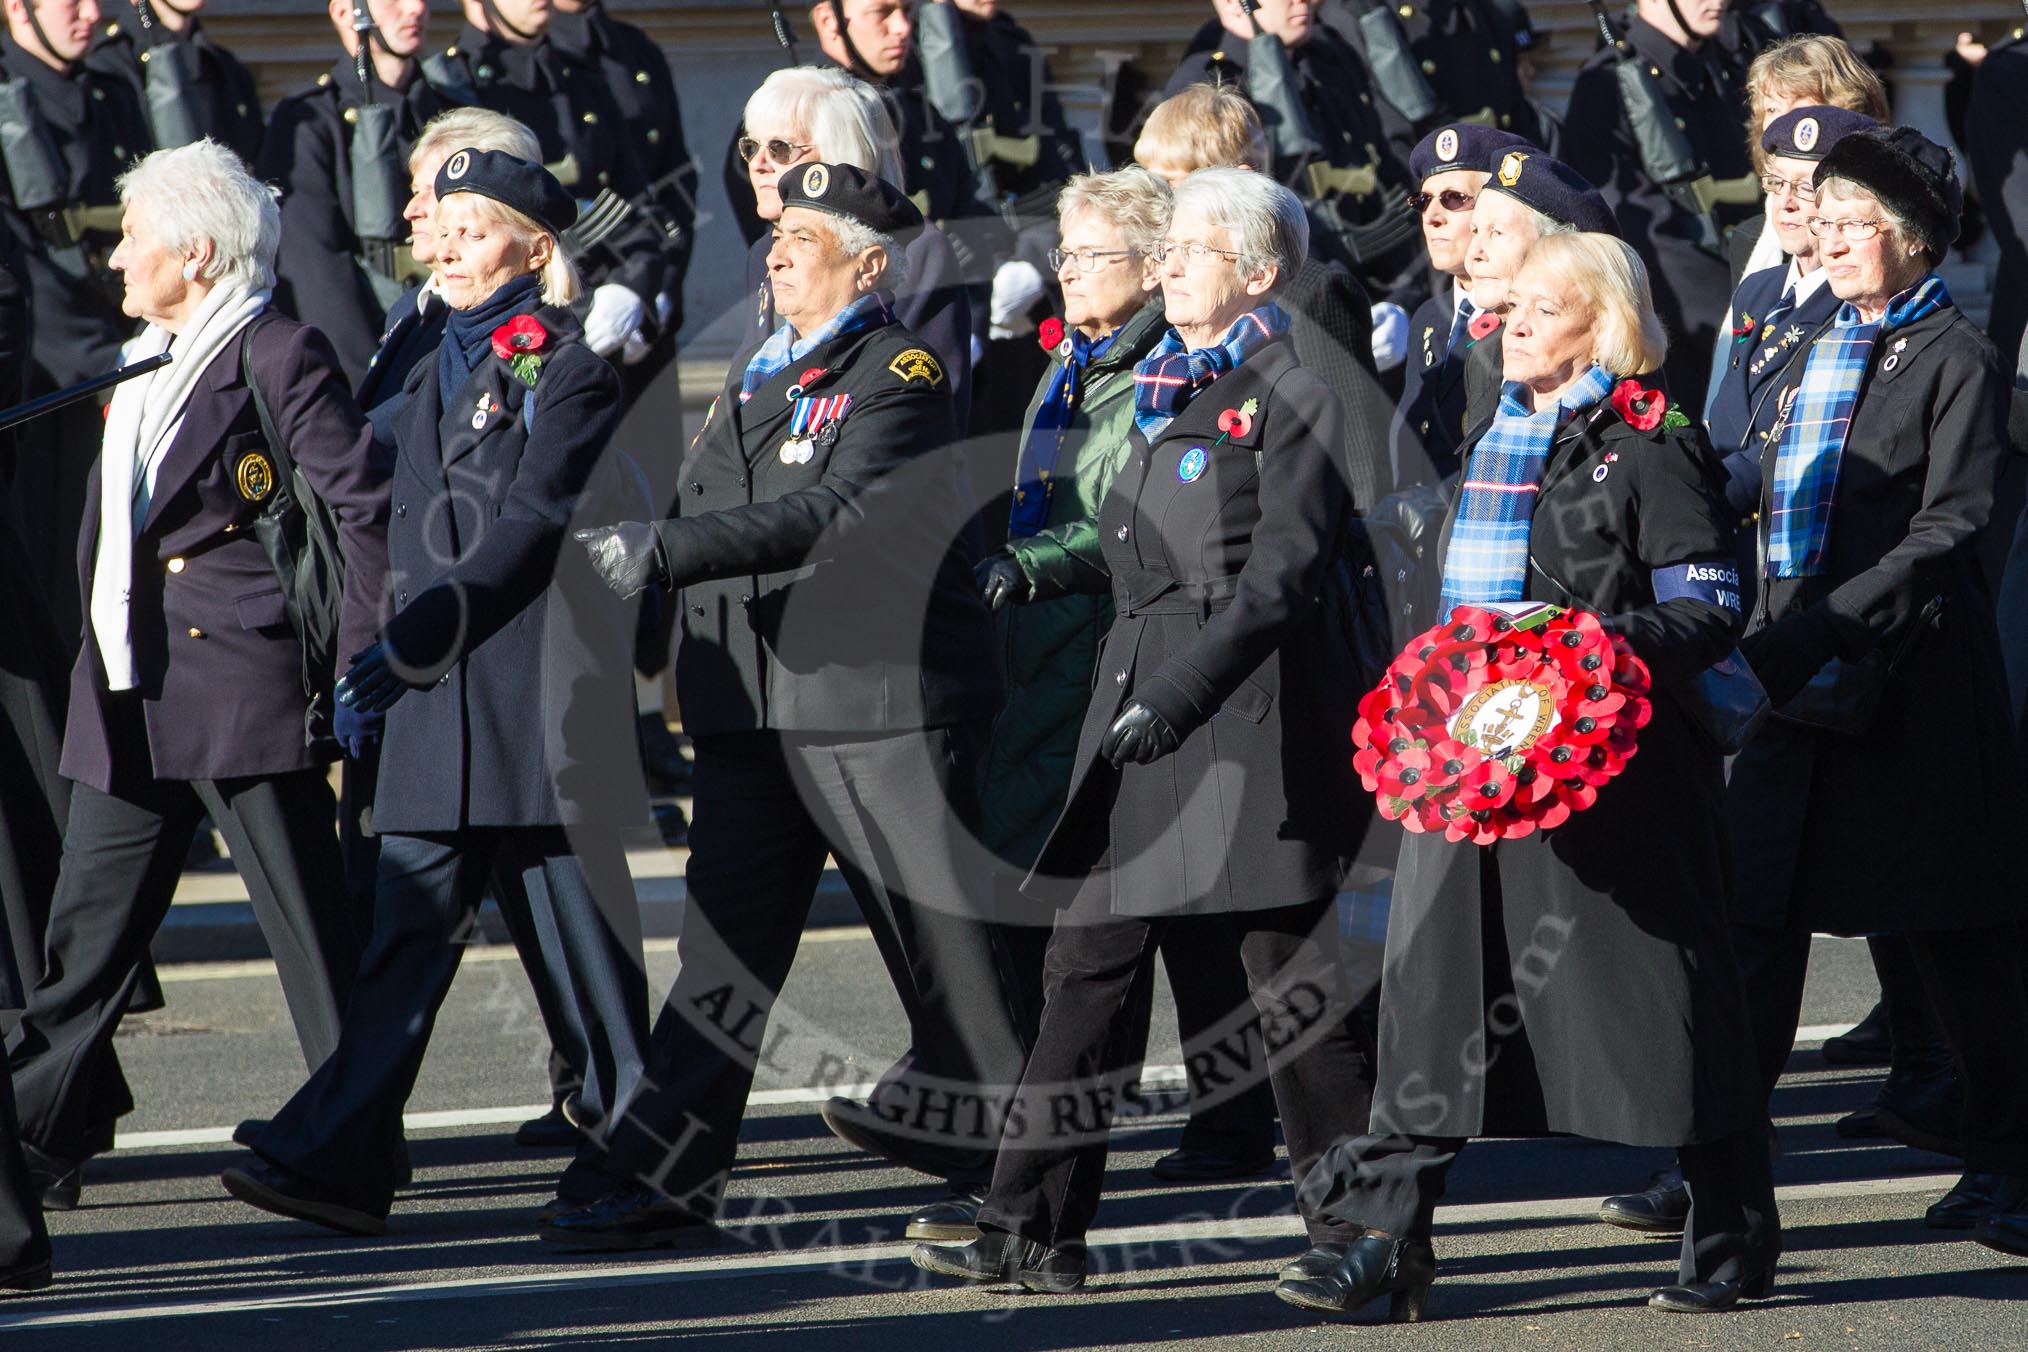 Remembrance Sunday 2012 Cenotaph March Past: Group E29 - Association of WRENS..
Whitehall, Cenotaph,
London SW1,

United Kingdom,
on 11 November 2012 at 11:41, image #206